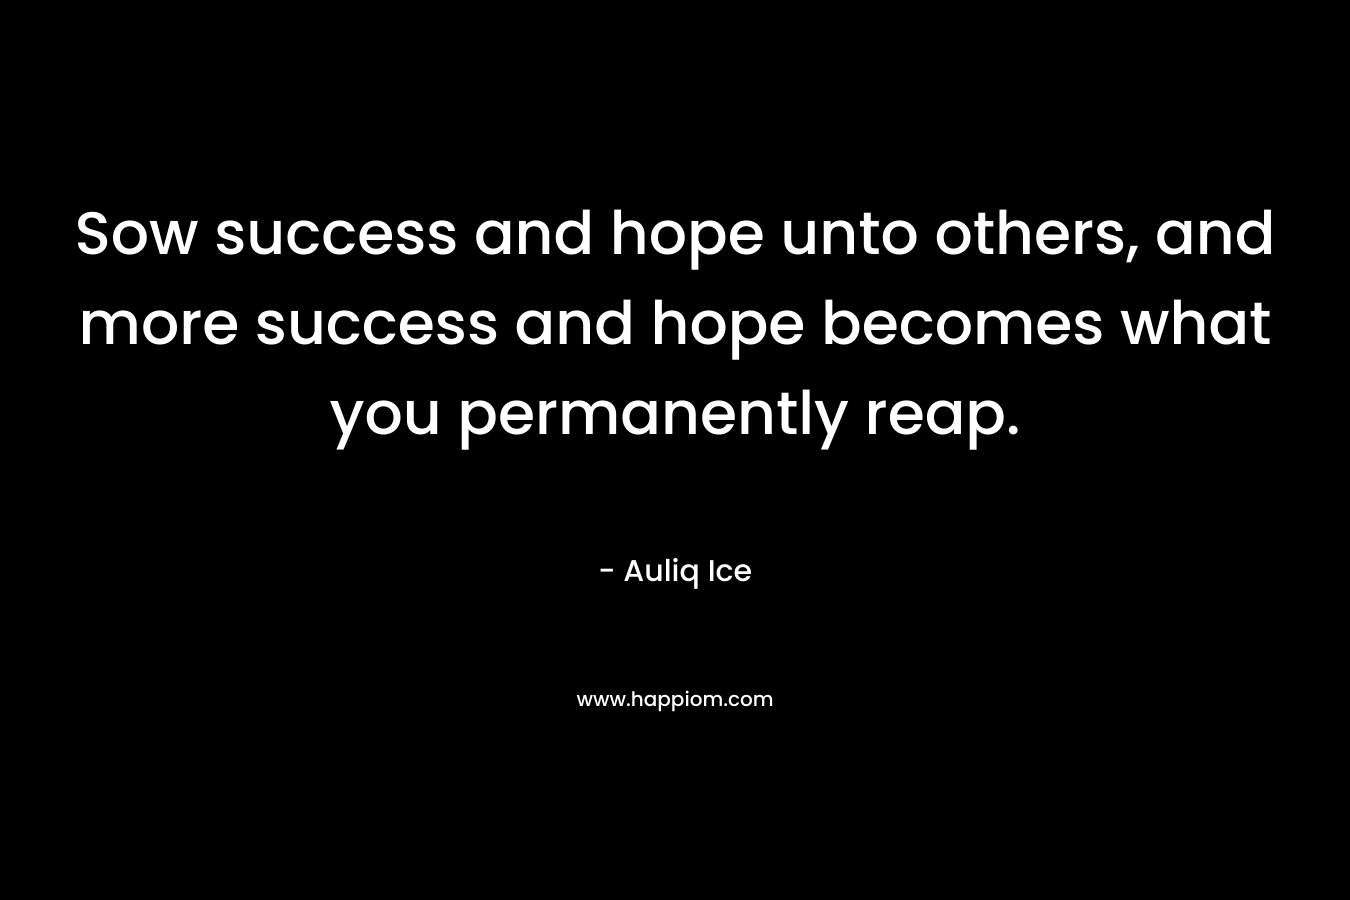 Sow success and hope unto others, and more success and hope becomes what you permanently reap.